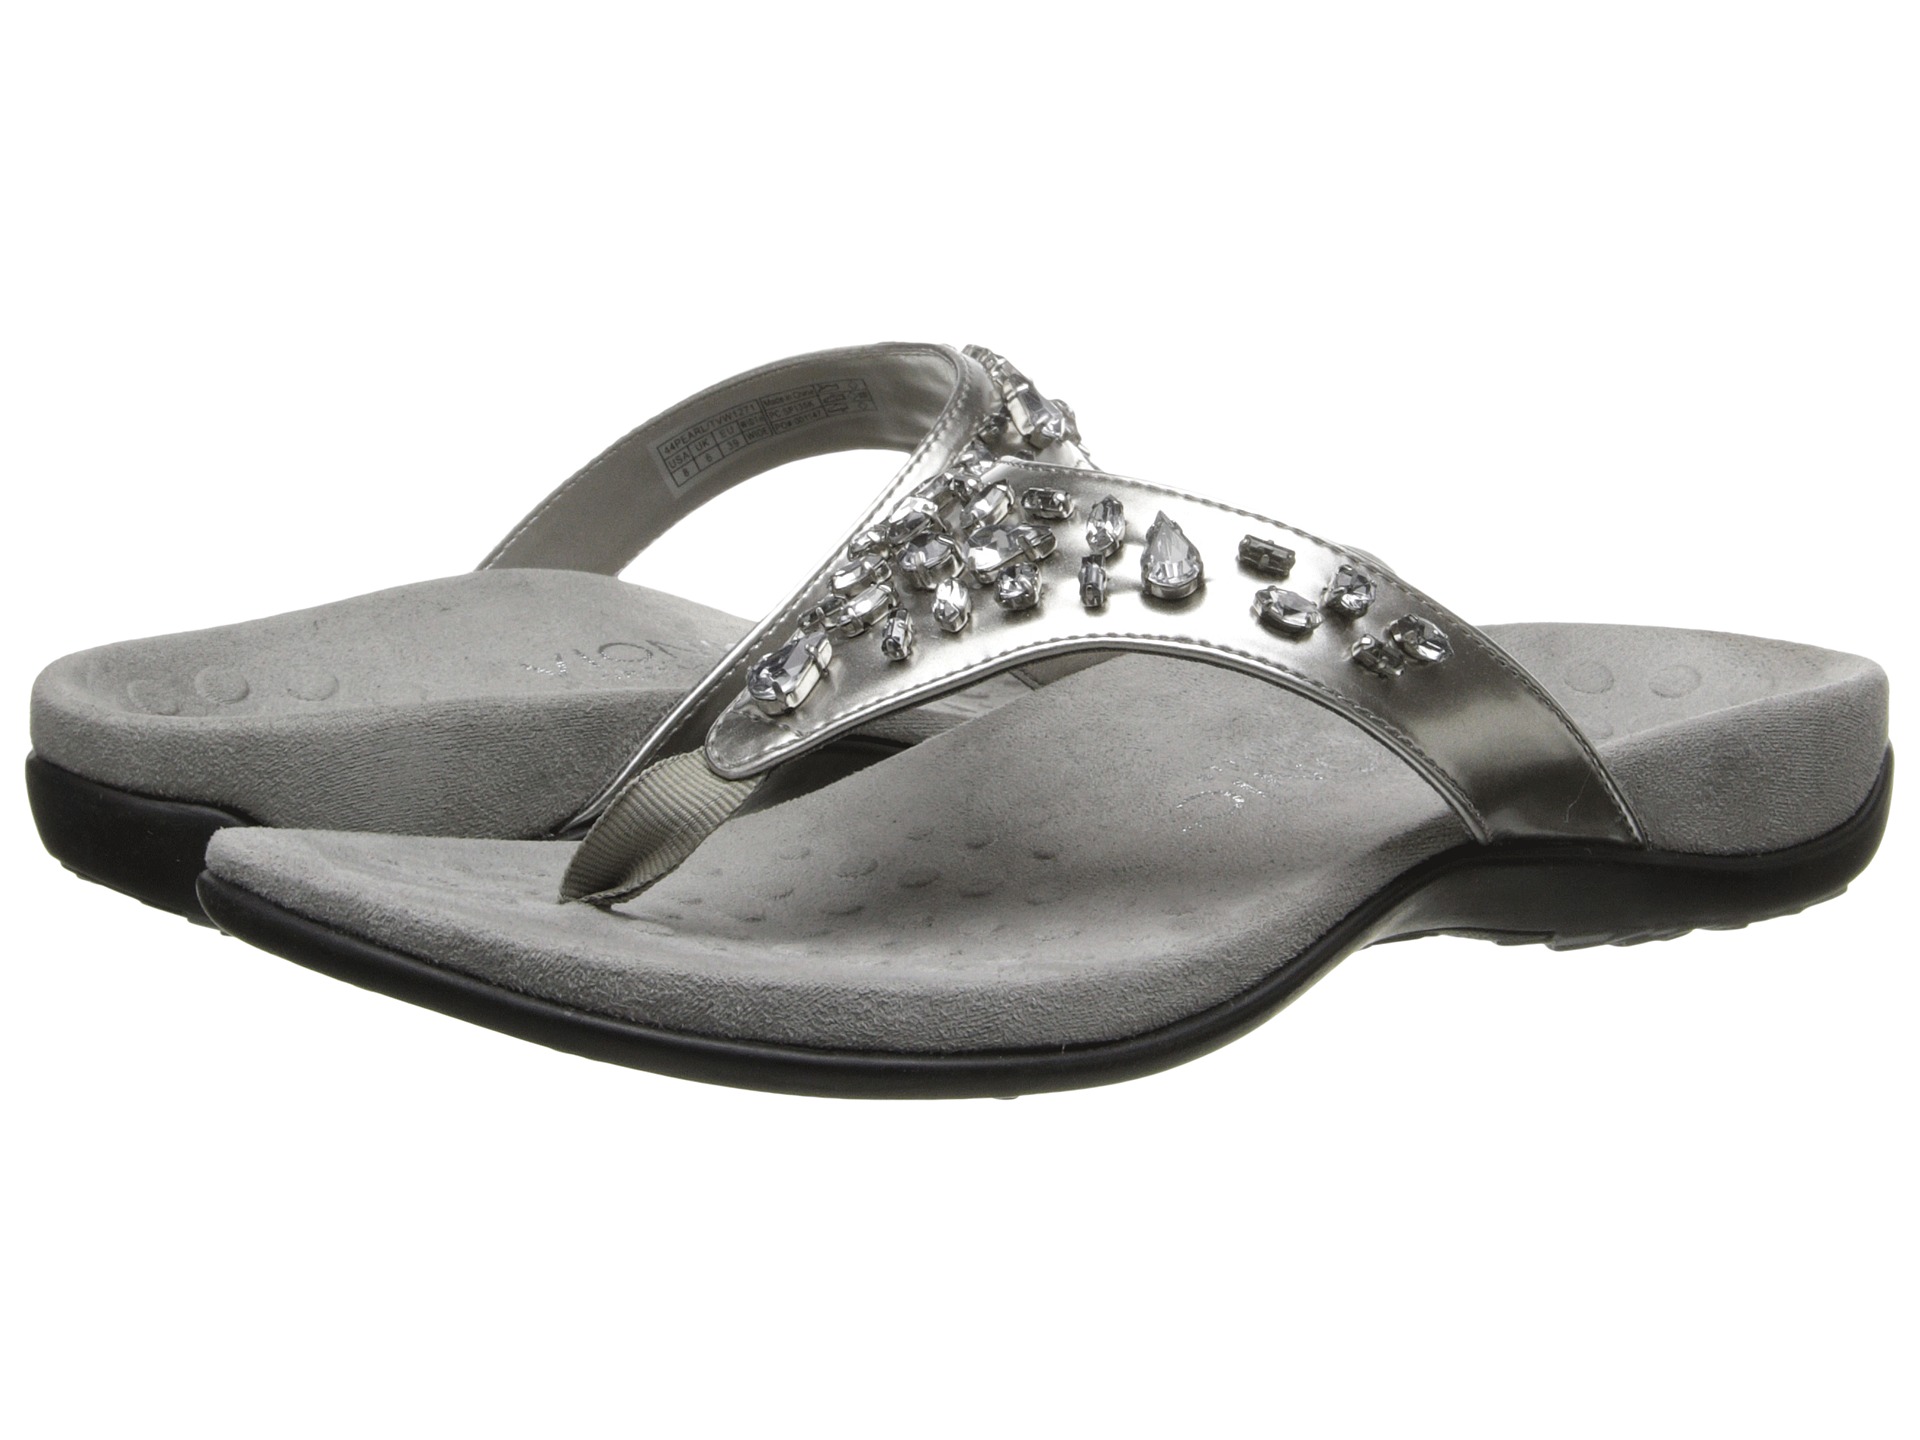 Vionic With Orthaheel Technology Pearl Pewter Patent | Shipped Free at ...